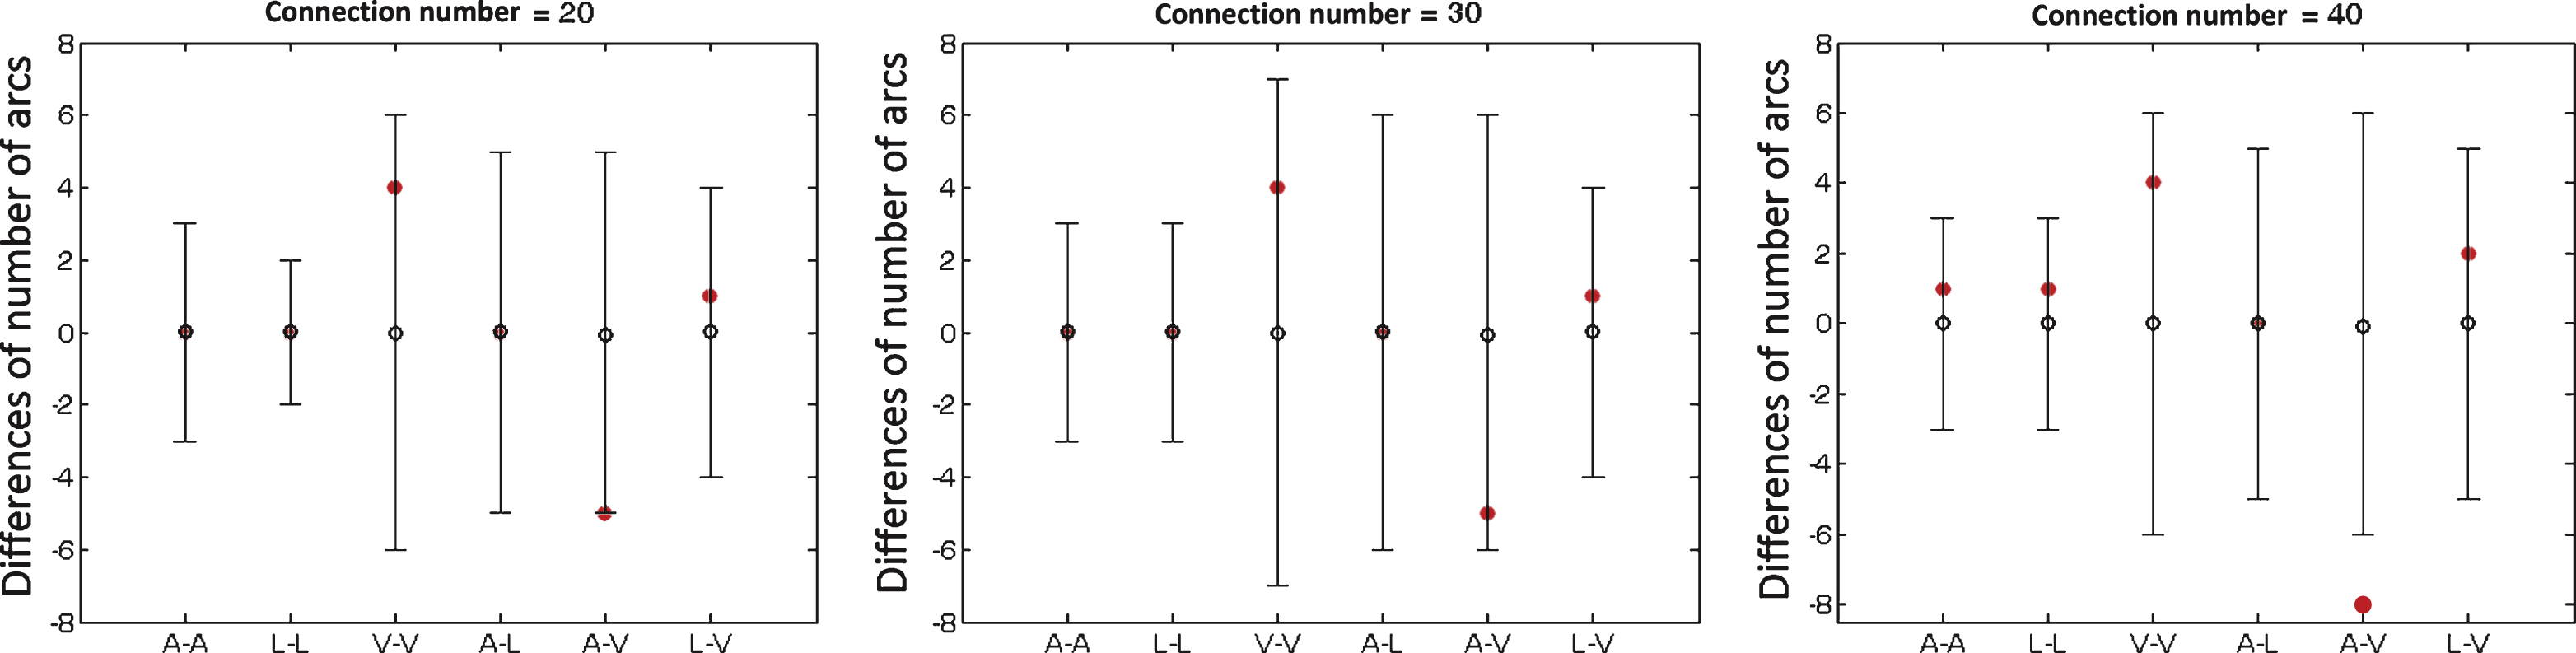 Between-group differences of number of structural brain connections within and between auditory, language, and visual systems with different sparsities for the connectivity matrix (20, 30 and 40 connections over a total of 91 connections). The horizon axis indicates six kinds of connections within and between auditory, language and visual systems (A-A: within auditory system; L-L: within language system; V-V: within visual system; A-L: between auditory and language systems; A-V: between auditory and visual systems; L-V: between language and visual systems). The vertical axis represents the differences of number of brain connections. Positive values indicate more connections in controls relative to deaf subjects, and negative vales indicate fewer connections in controls. Red solid circles represent the real difference between deaf and control groups, and black lines represent 95% confidence intervals with the mean difference shown as black hollow circle in the permutation test (repeated time = 10000). Group difference is significant if the red solid circle (the real difference) is not located in the 95% confidence intervals.